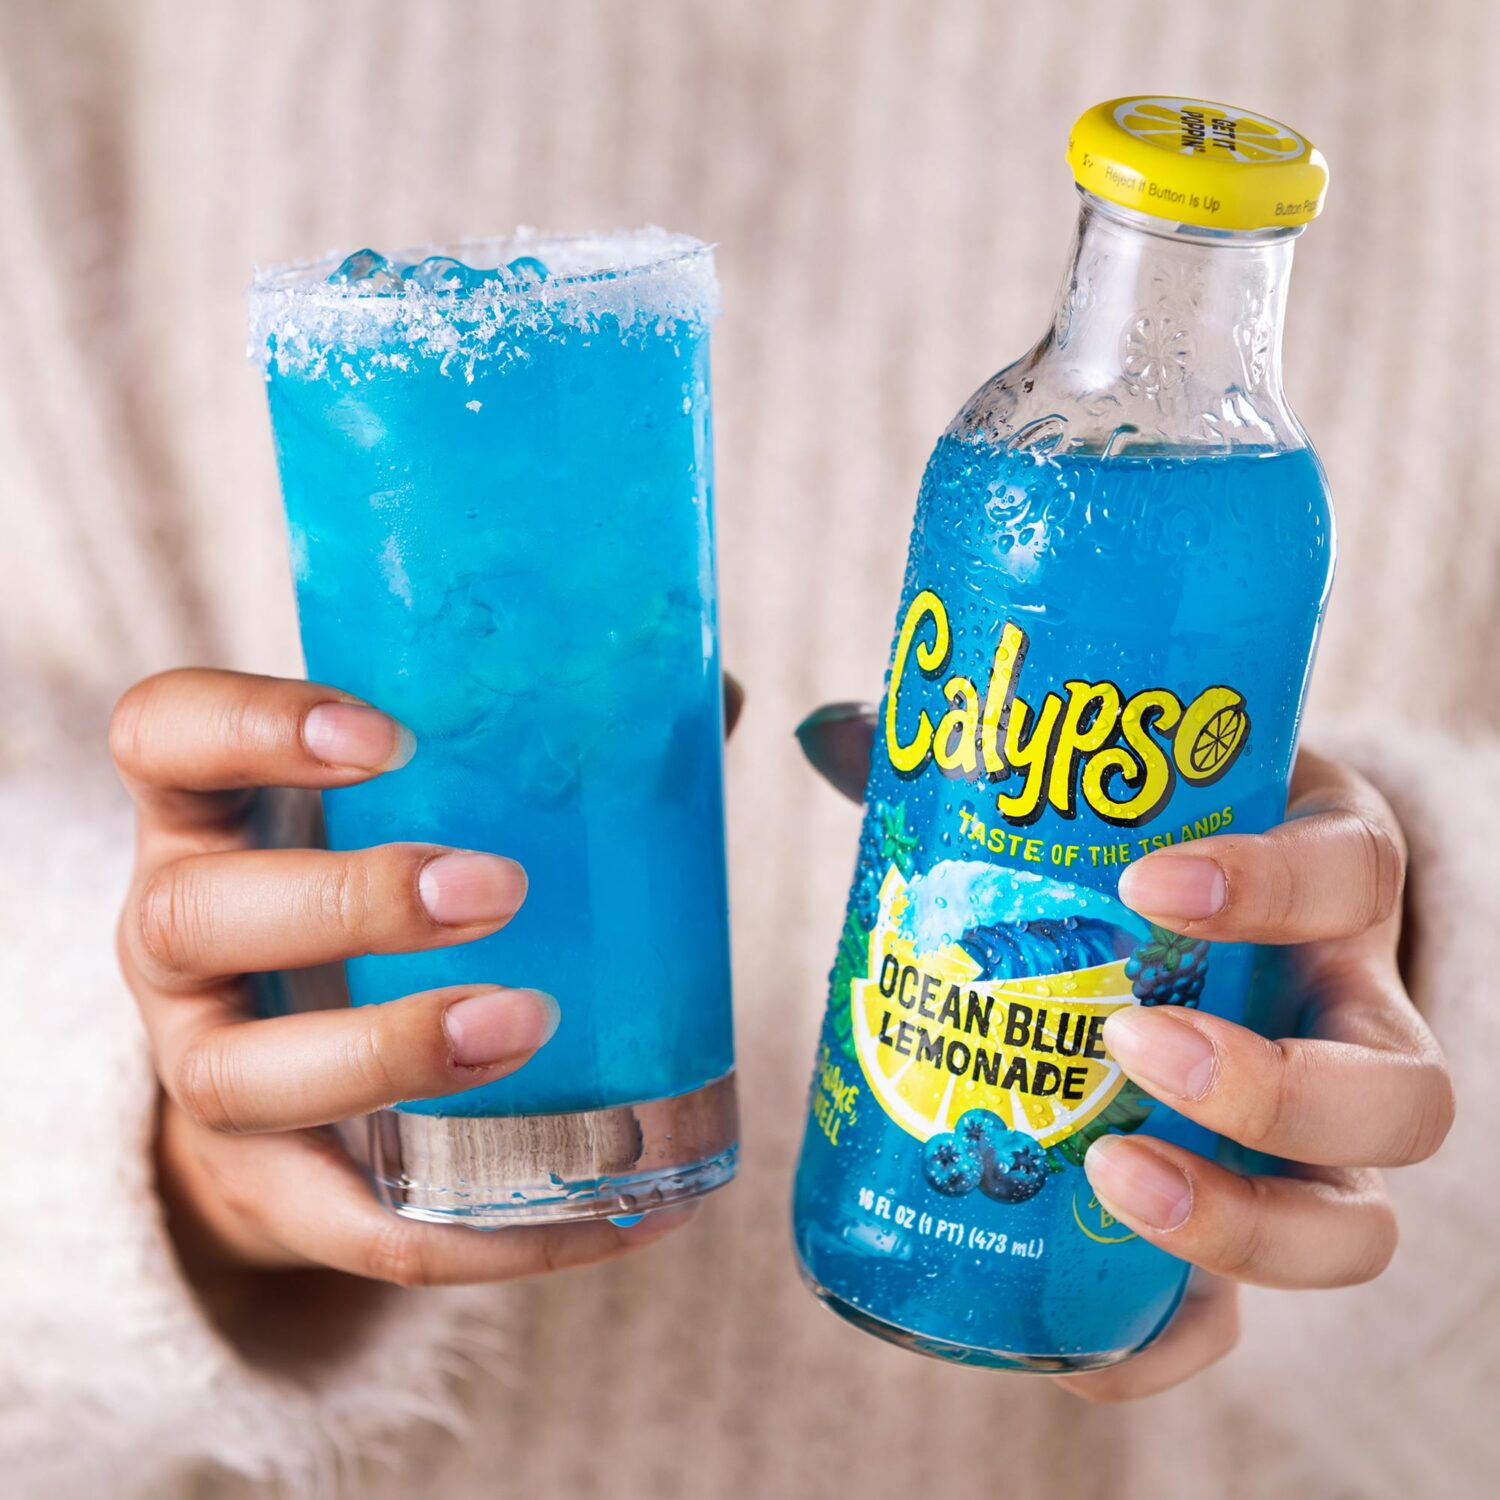 Calypso Ocean Blue and Blue Frost cocktail